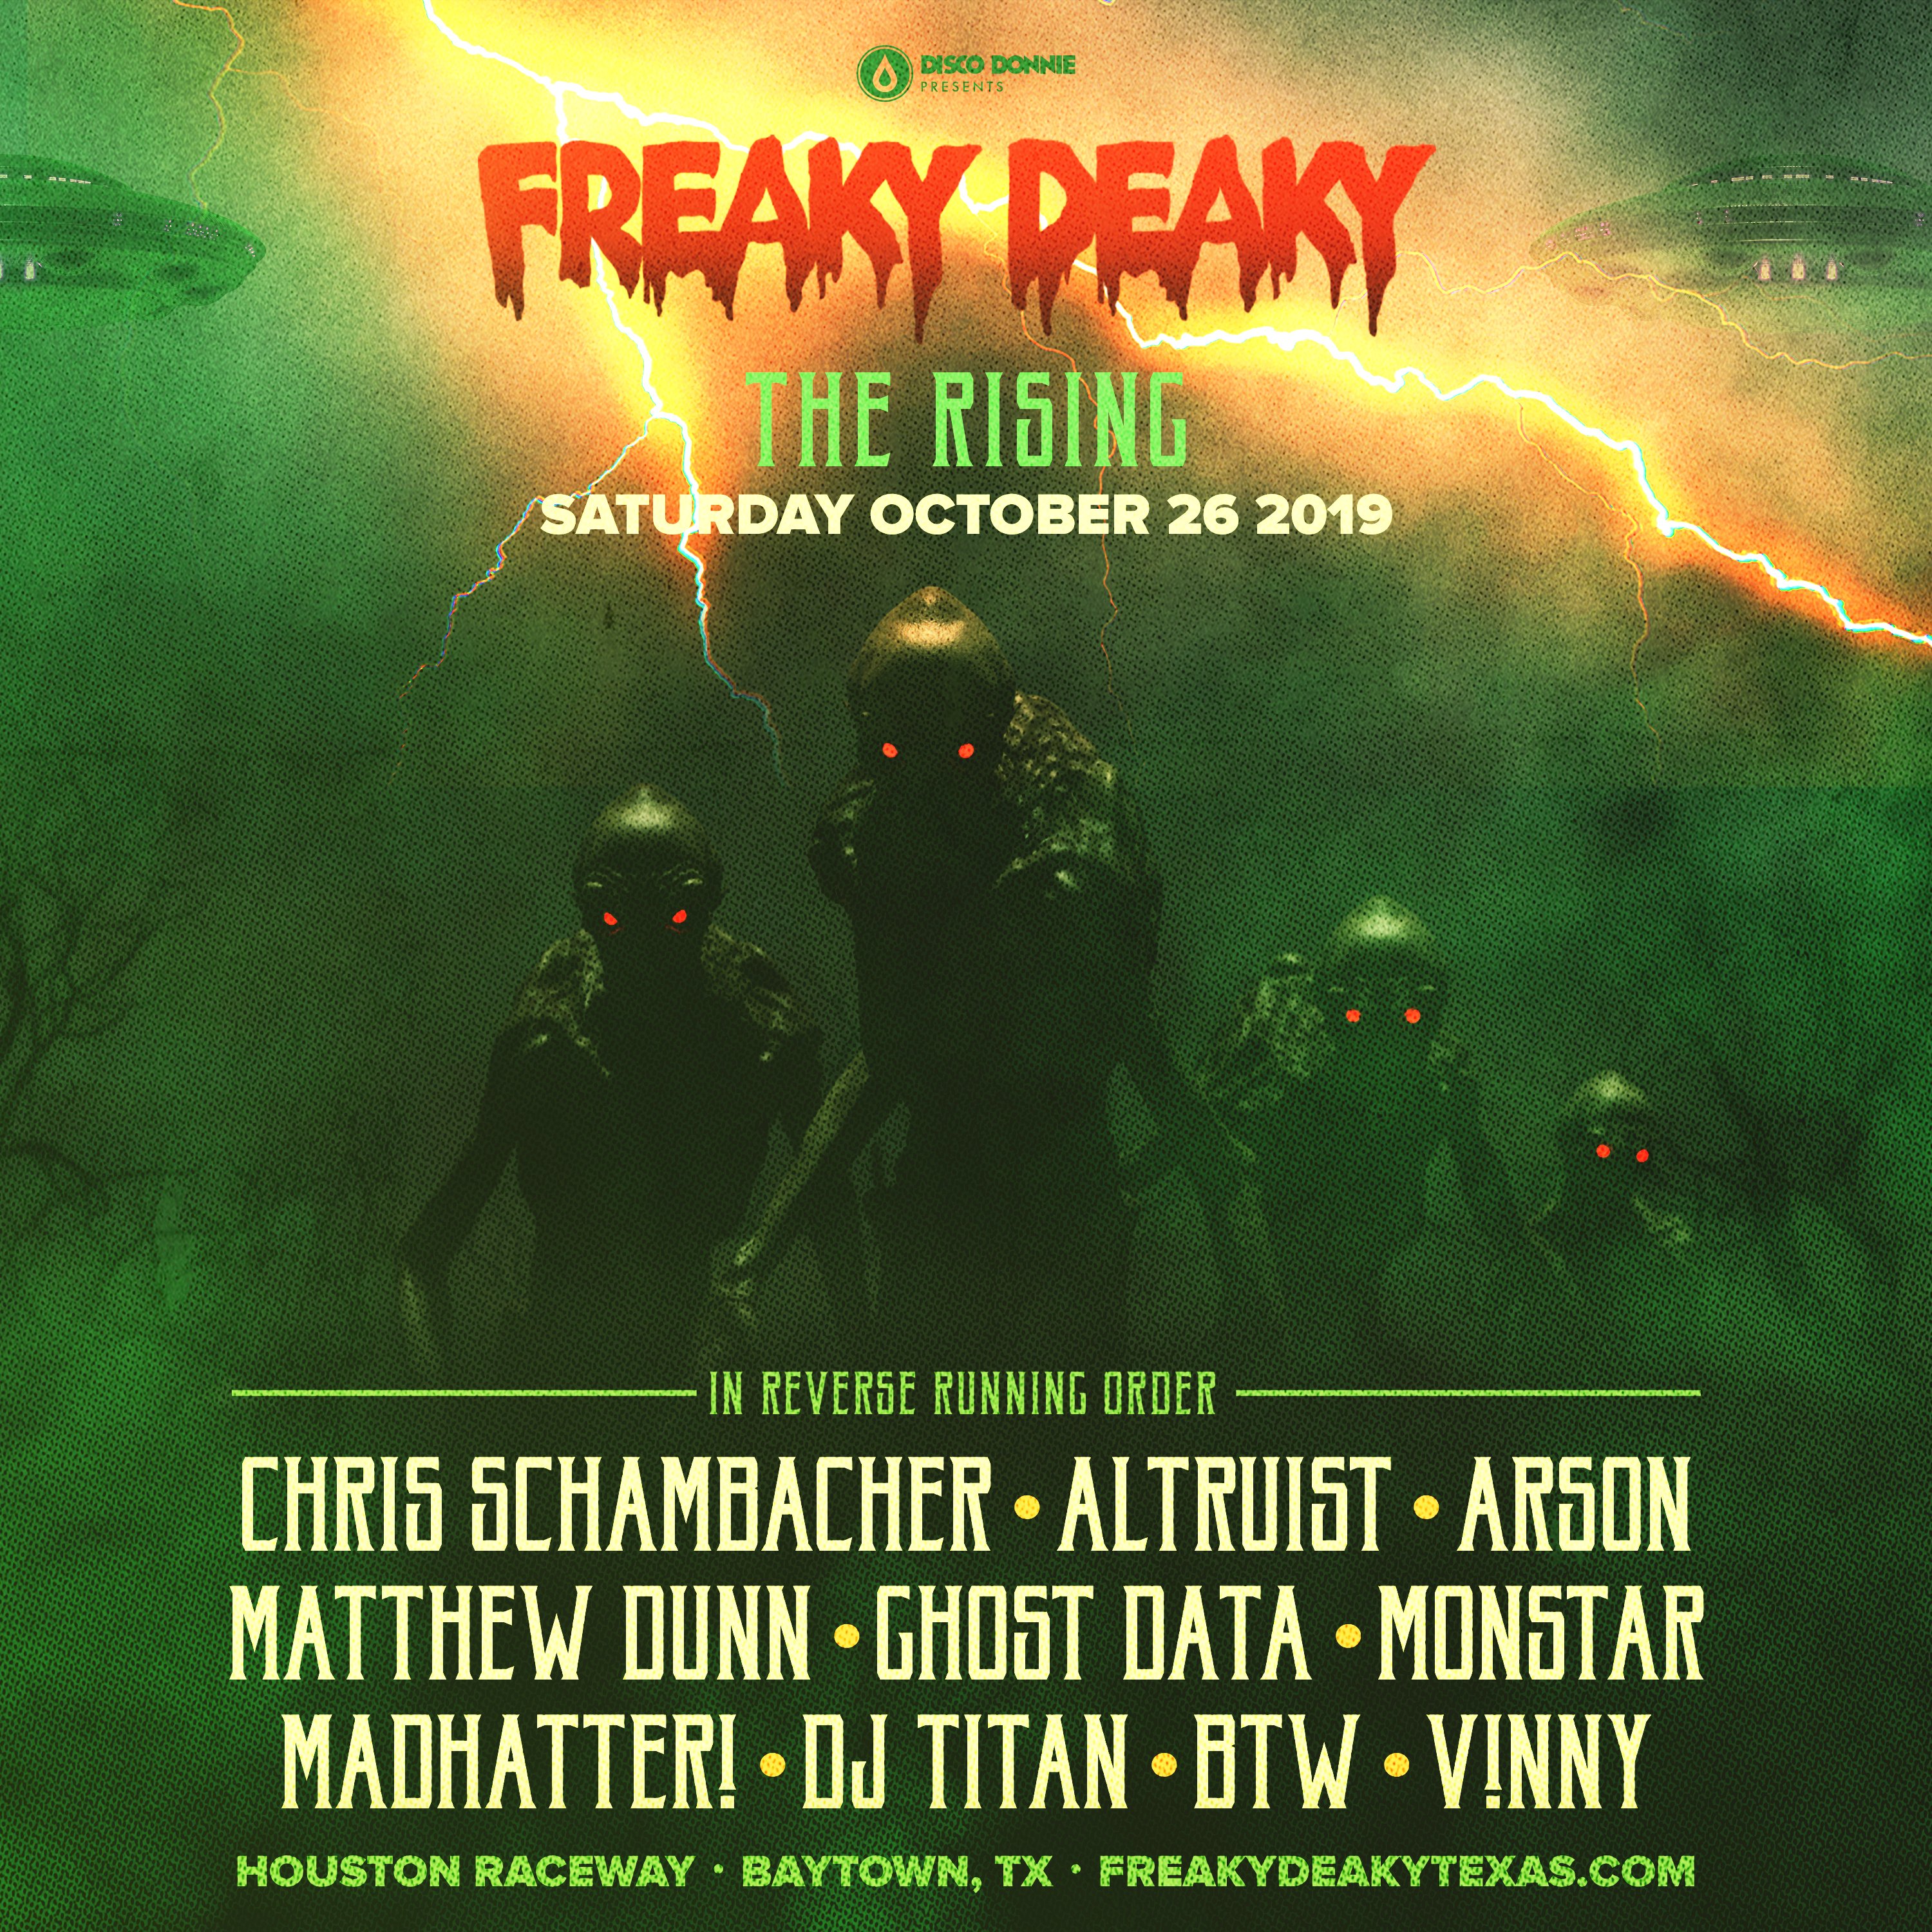 The Freaky Deaky Houston lineup for The Rising